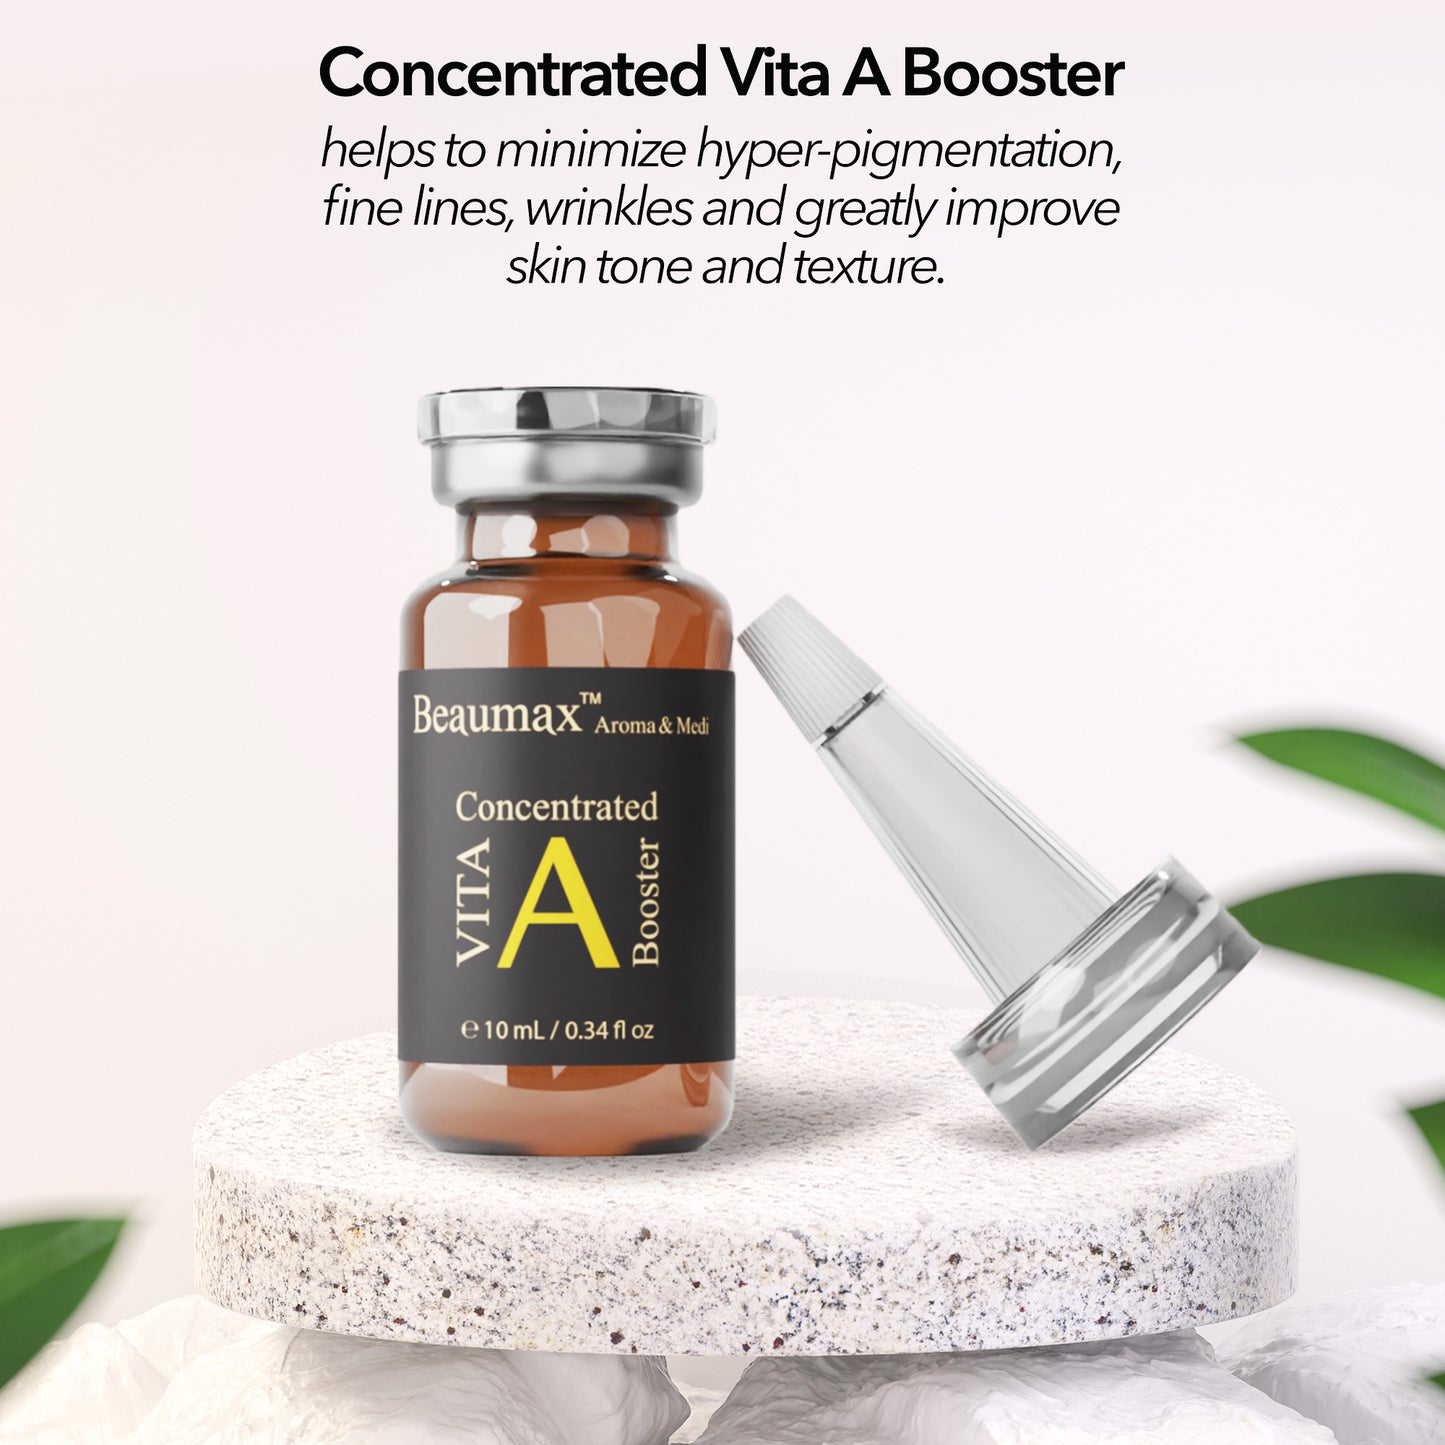 Concentrated Vita-A Booster 10ml